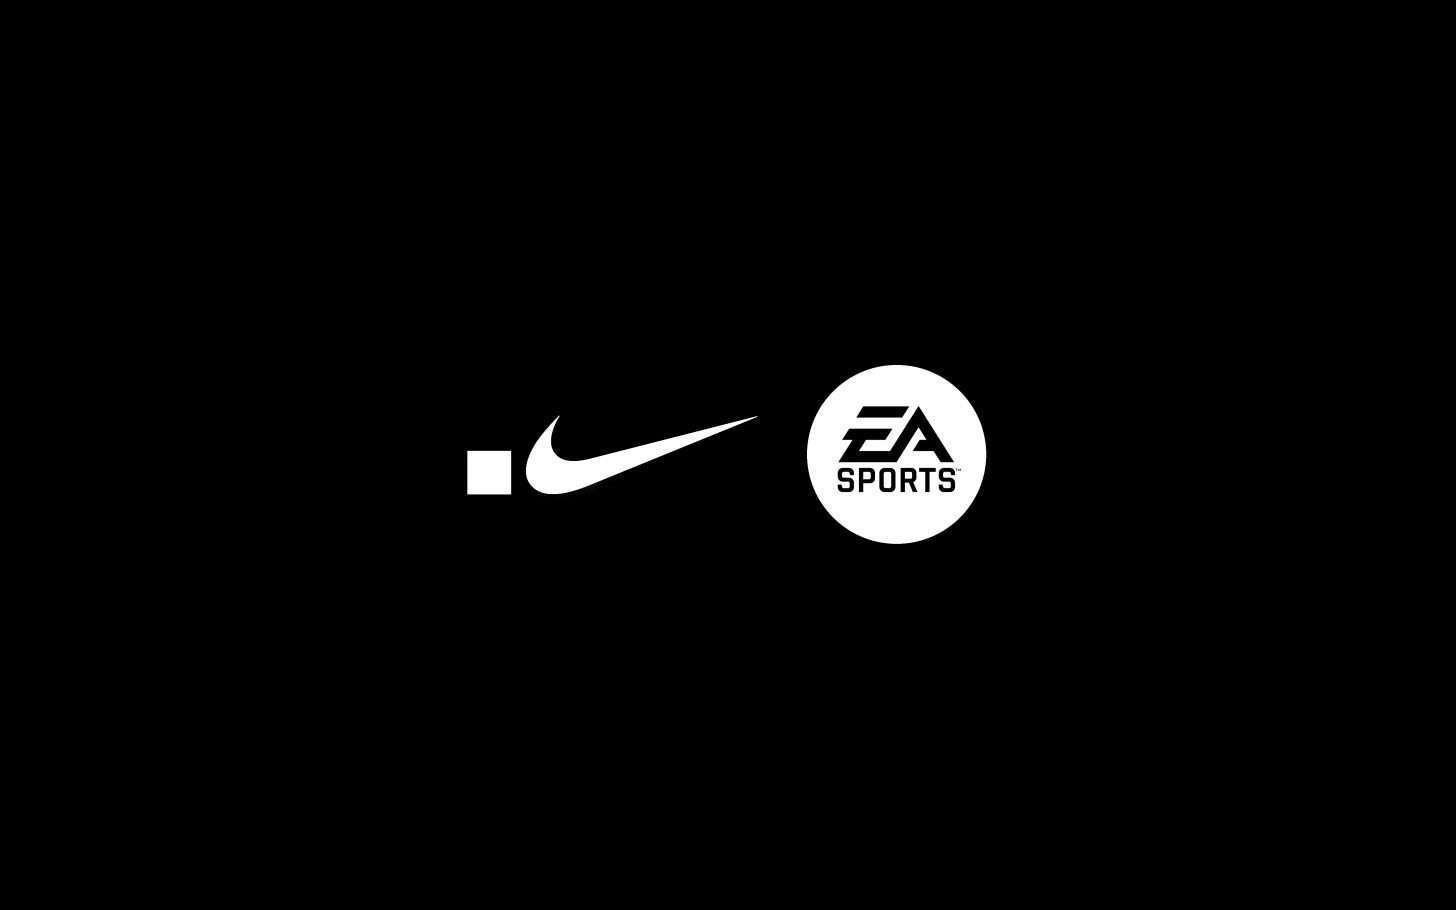 Nike Virtual Studios secures new partnership with EA SPORTS to boost .SWOOSH